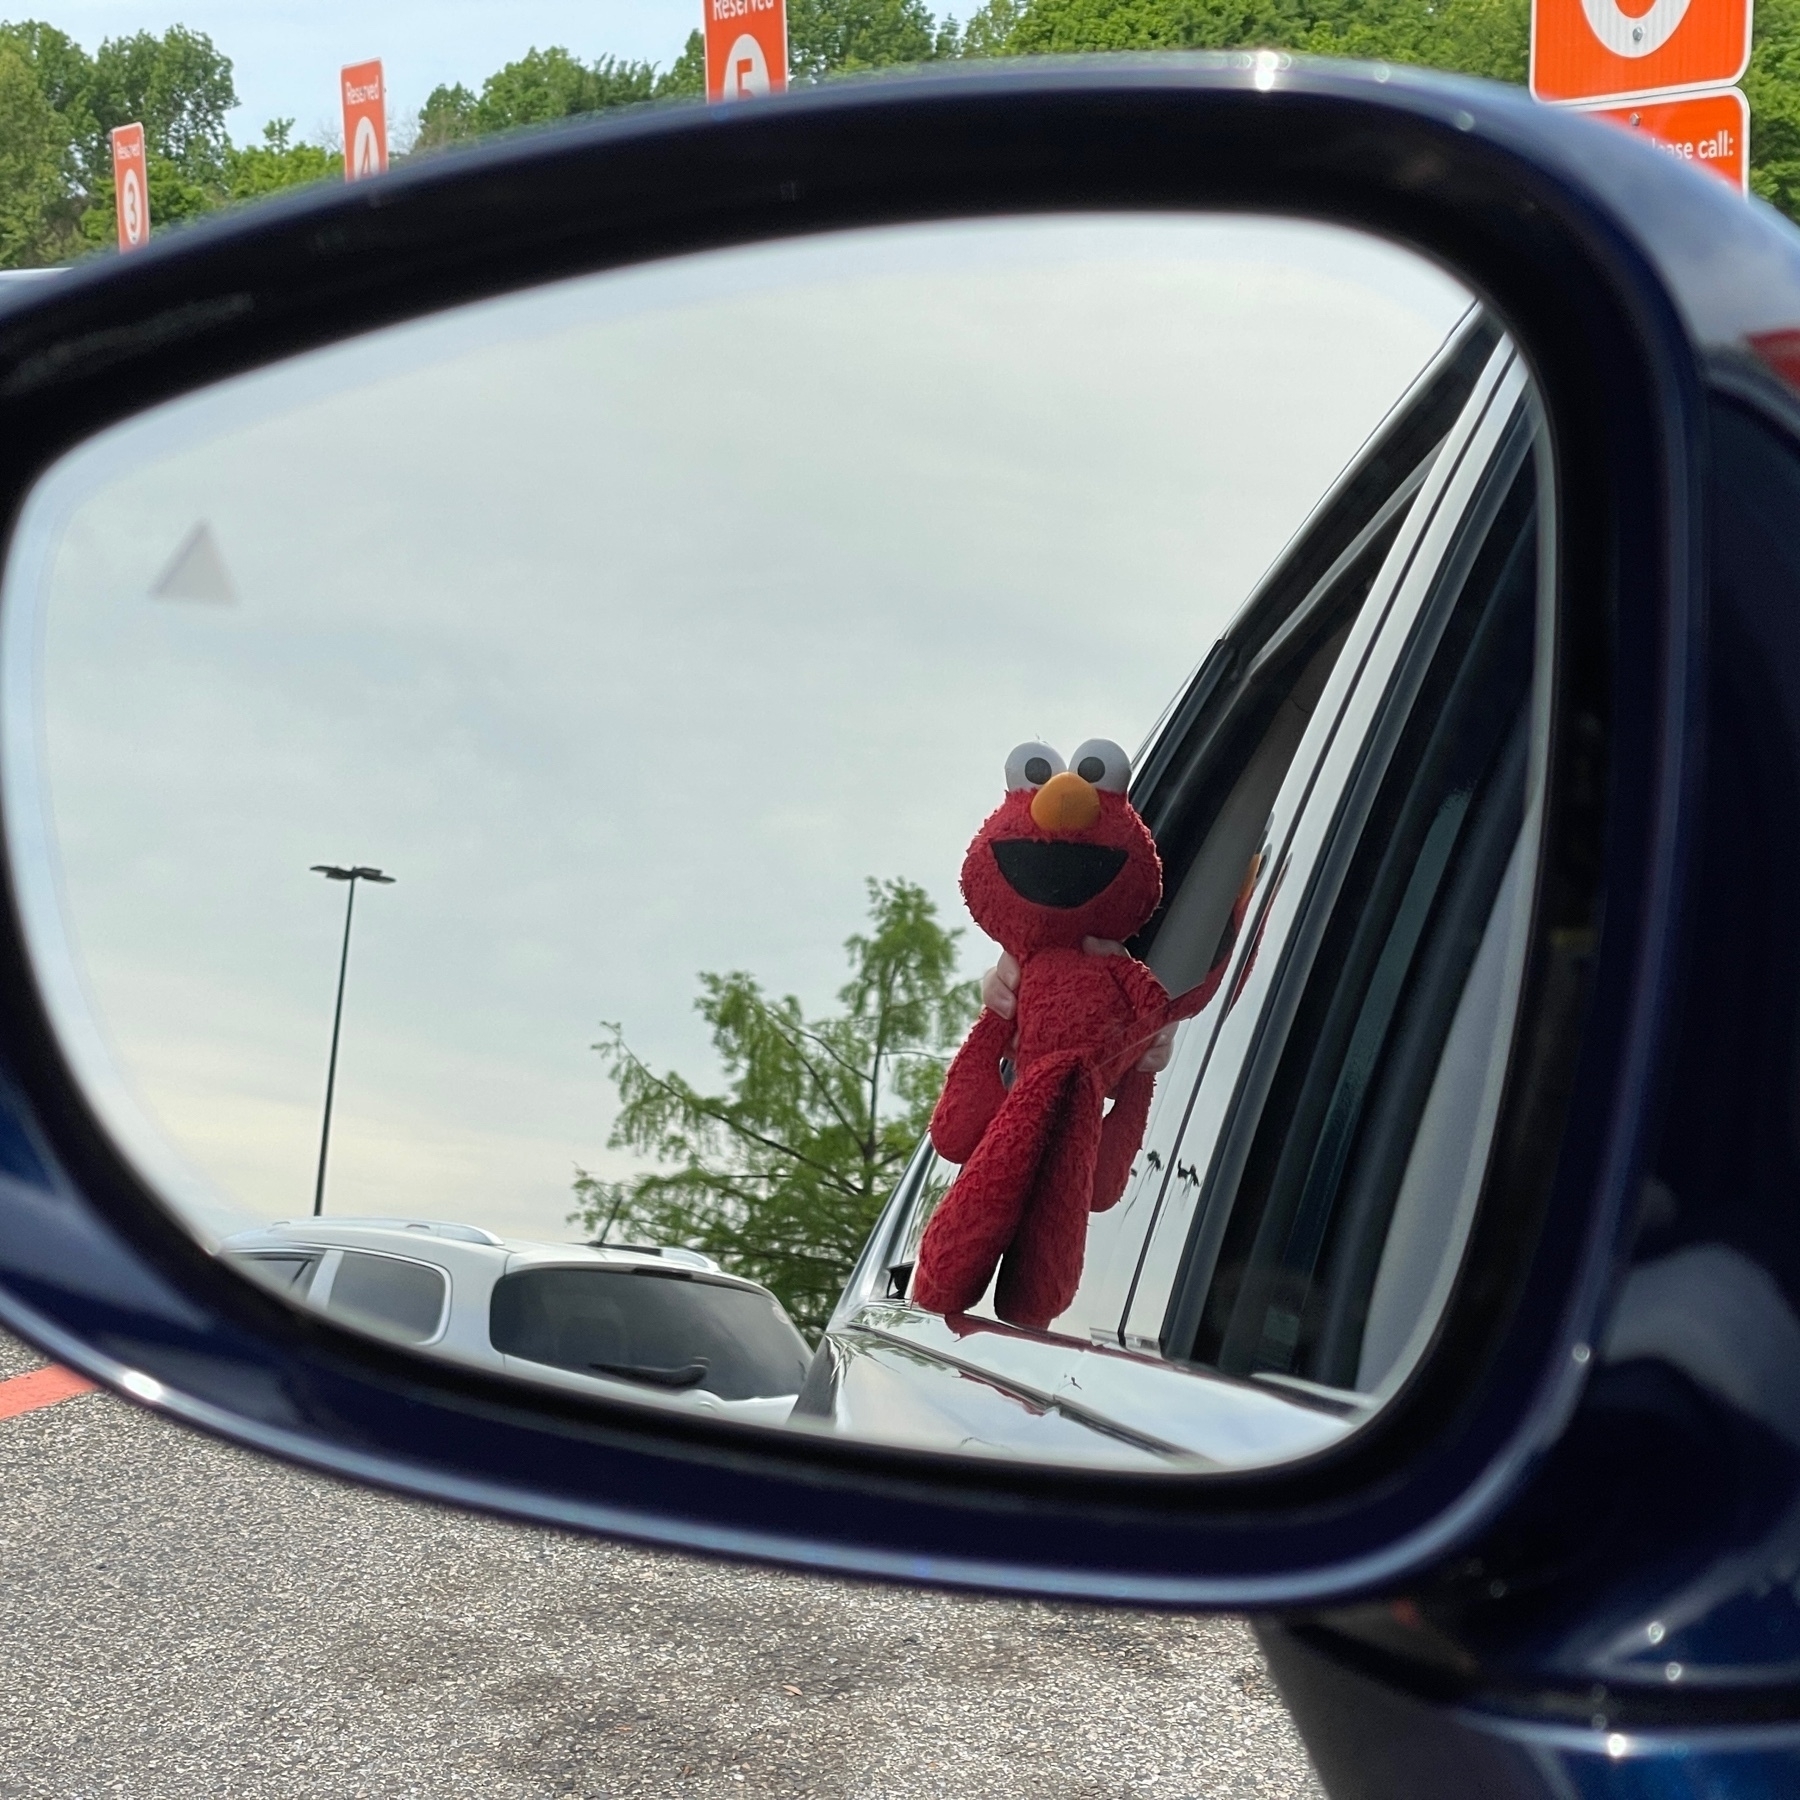 Elmo in the rearview mirror